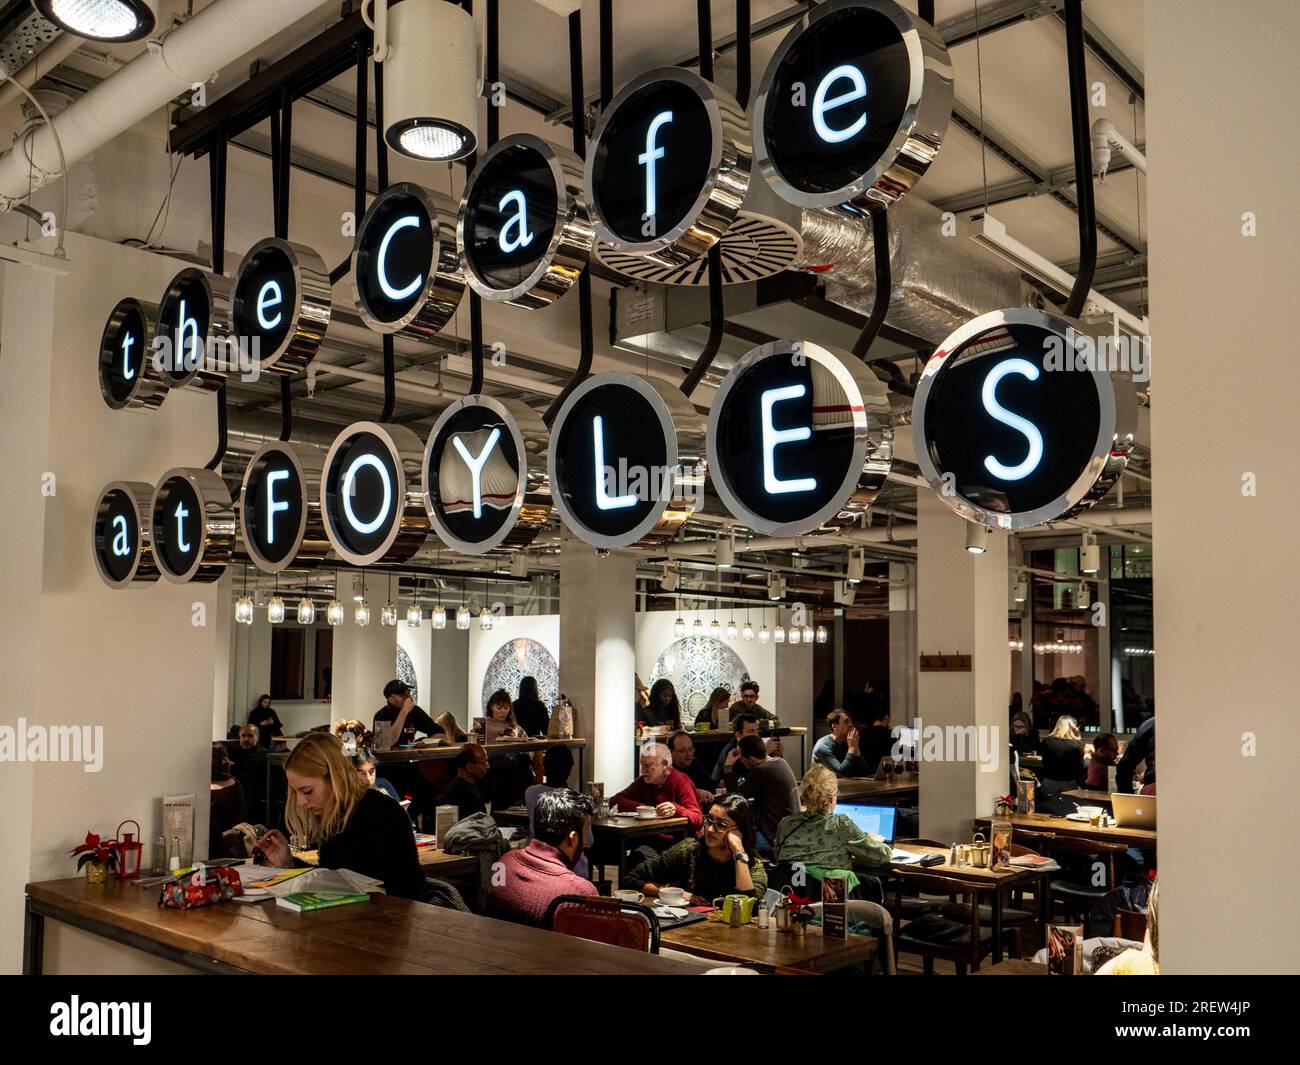 Foyles Cafe. The Cafe at Foyles bookshop. Foyles bookstore in Charing Cross Road in central London UK. Foyles was founded in 1903. Stock Photo